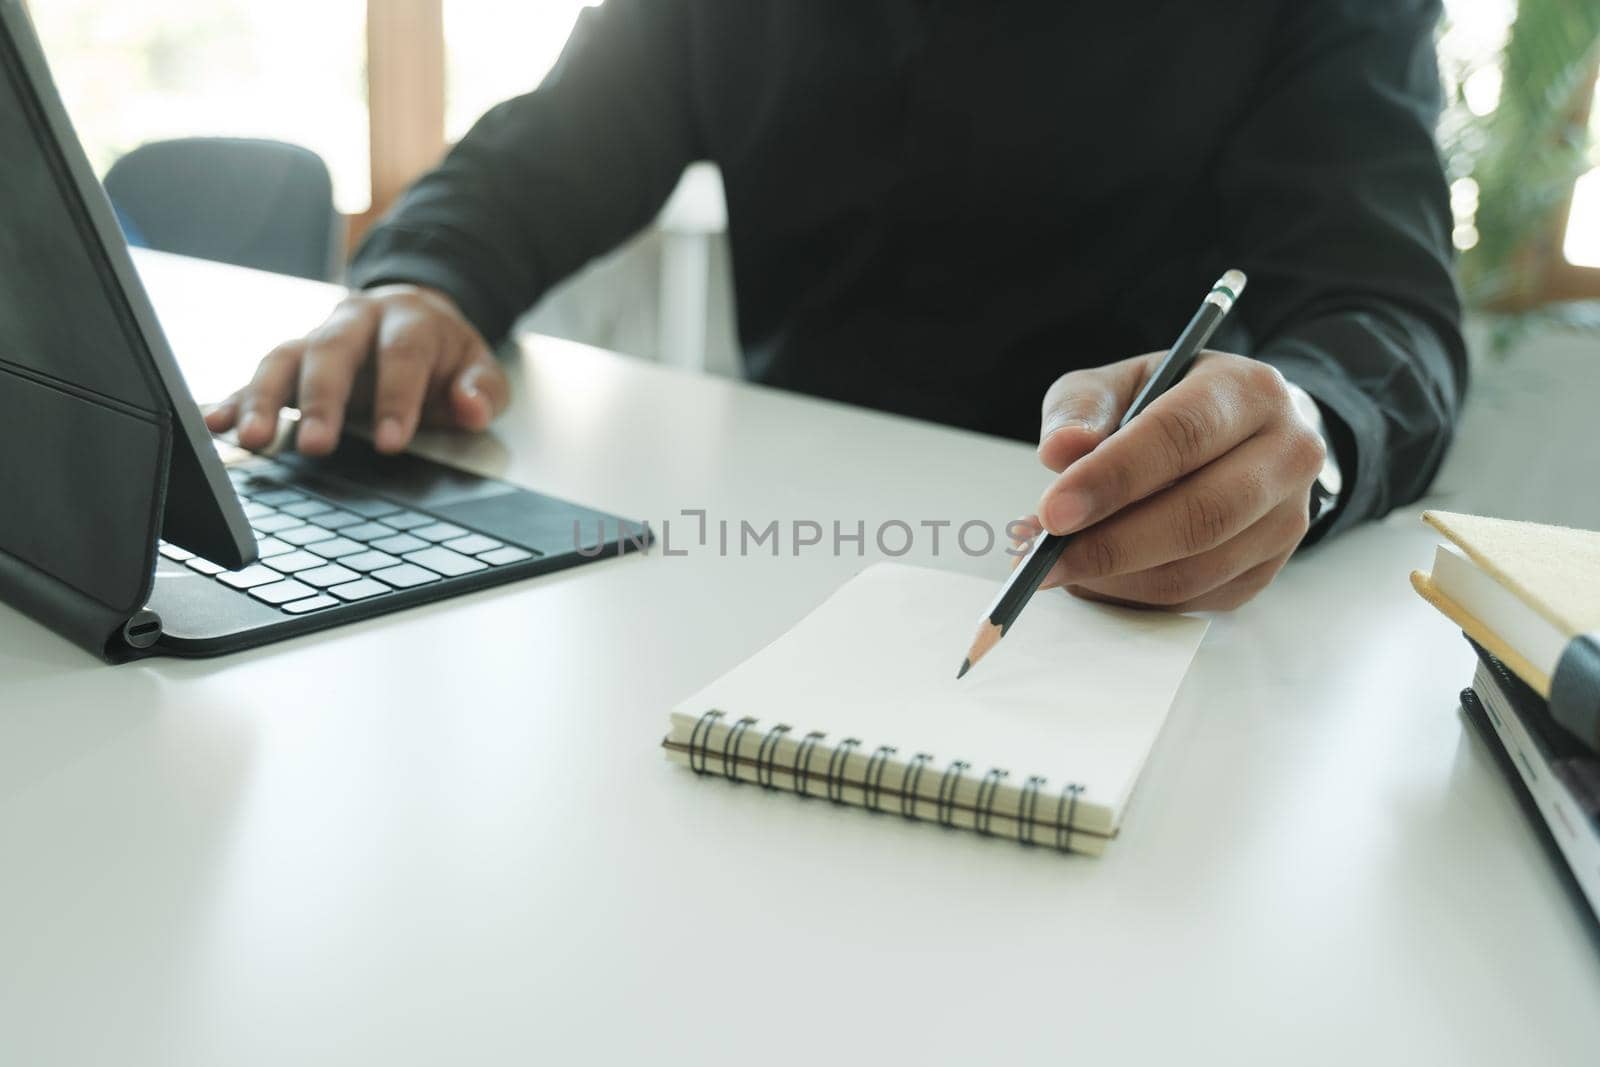 Closeup businessman working on digital tablet and laptop computer using stylus pen on white table.